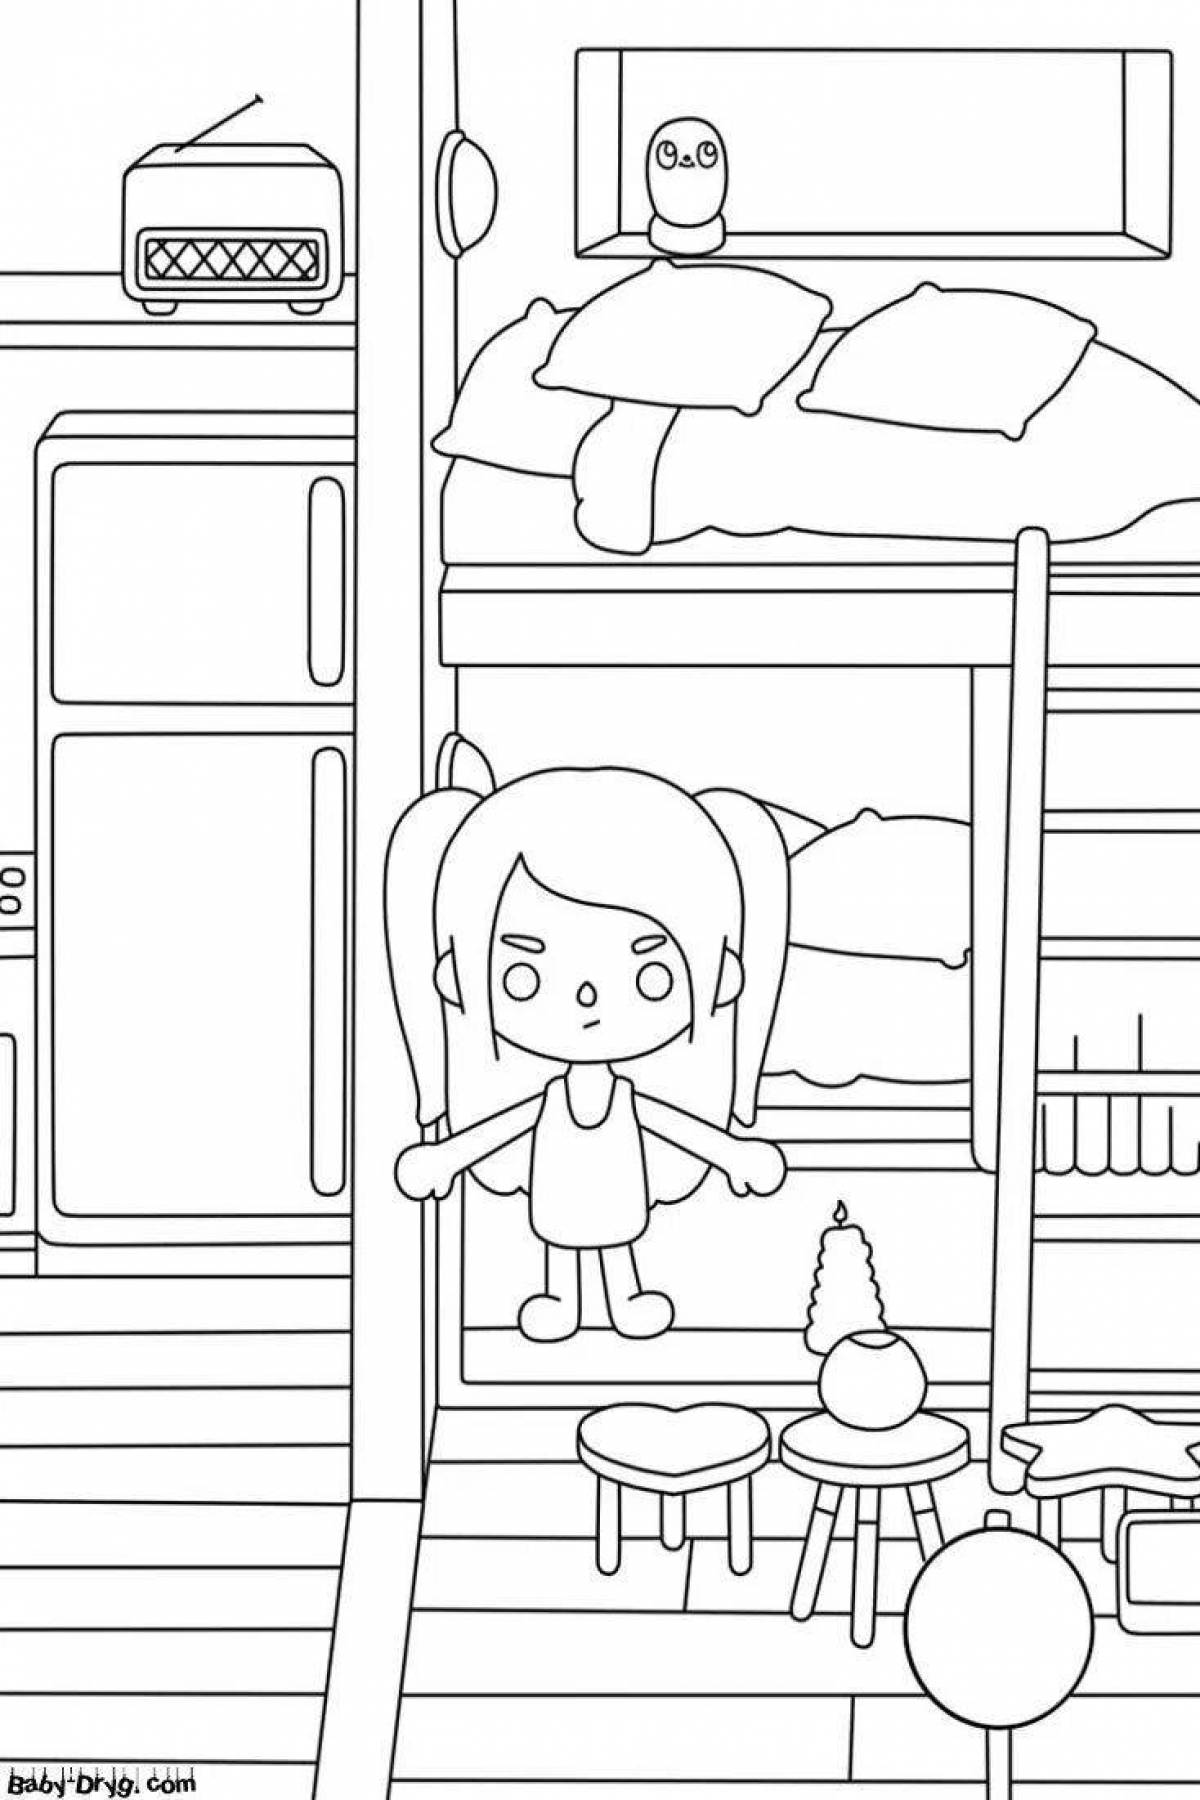 Playful current side coloring page